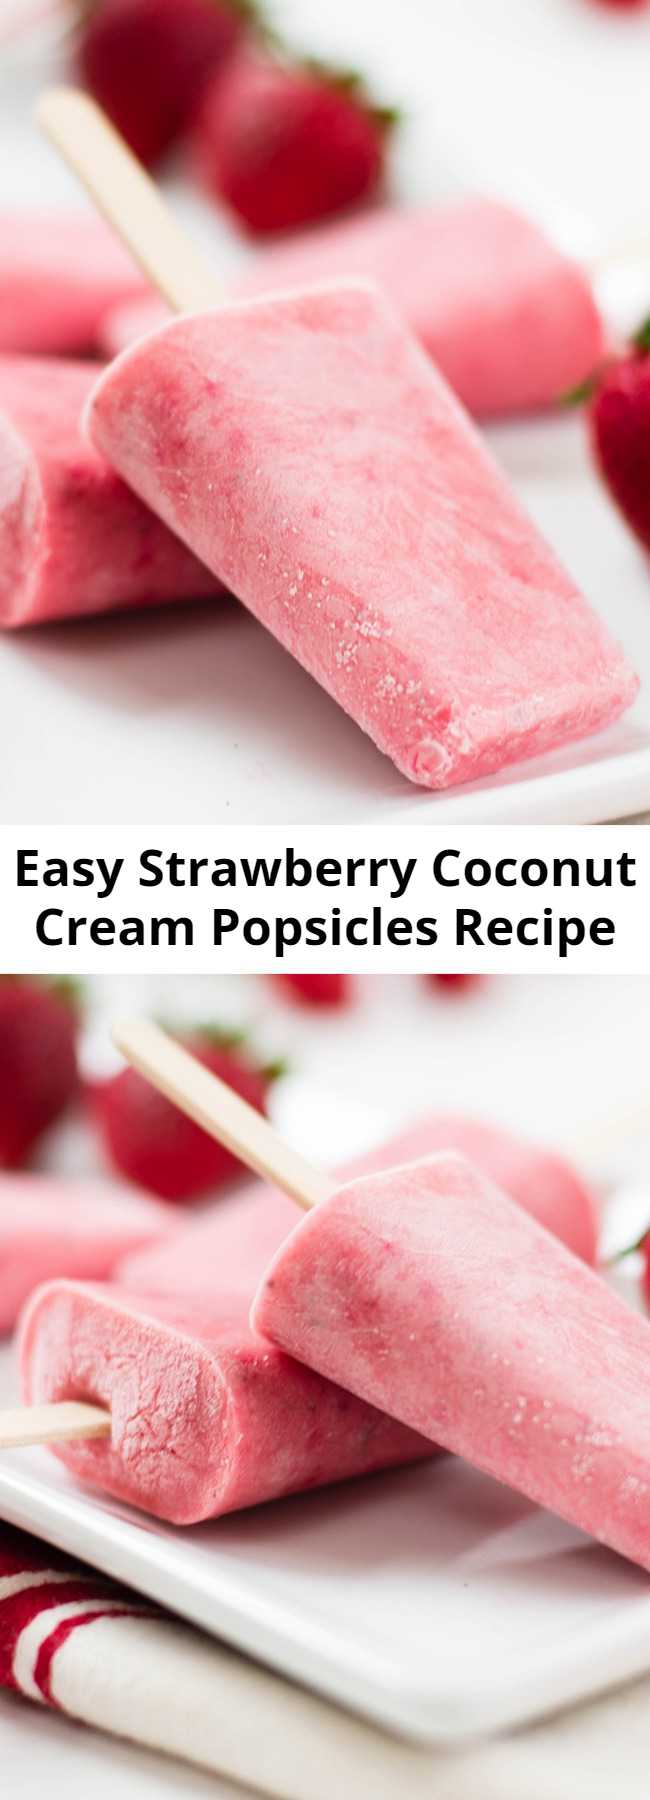 Easy Strawberry Coconut Cream Popsicles Recipe - This is a berry sweet way to cool off this summer.